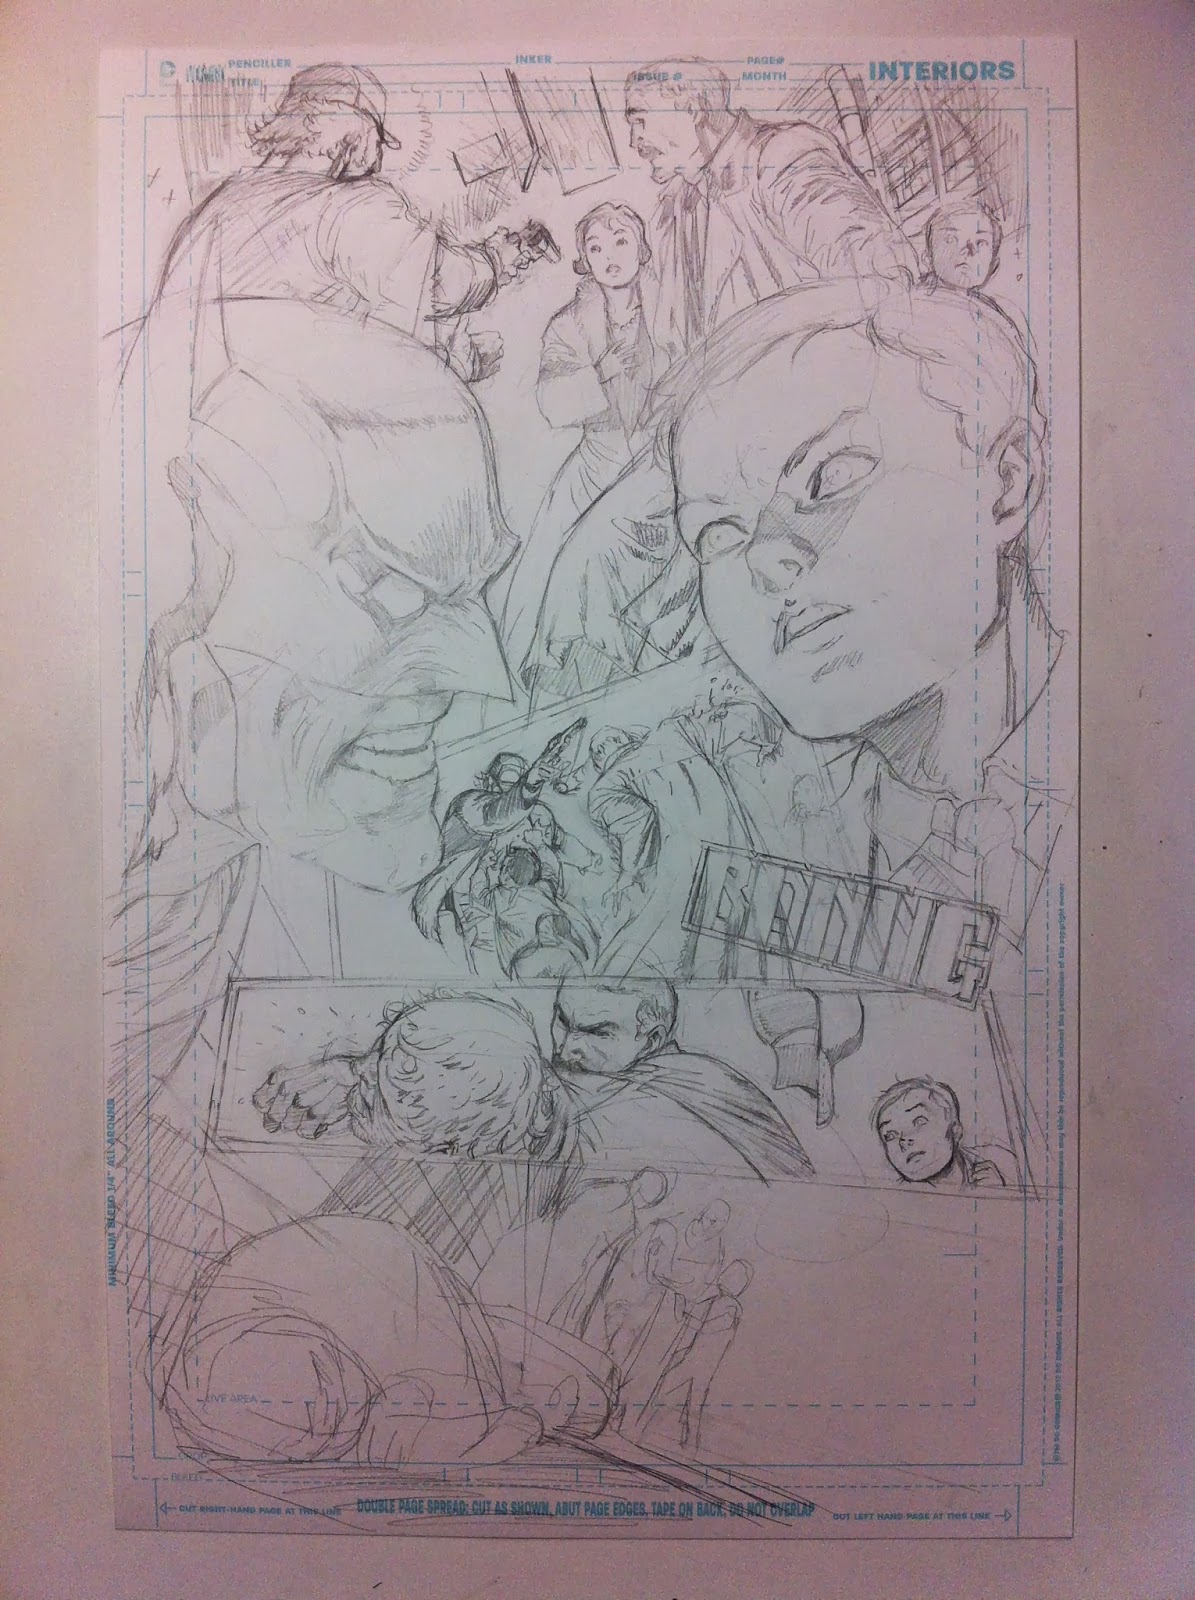 Making of a page: DETECTIVE COMICS 27: "Sacrifice" page 2 by Guillem March